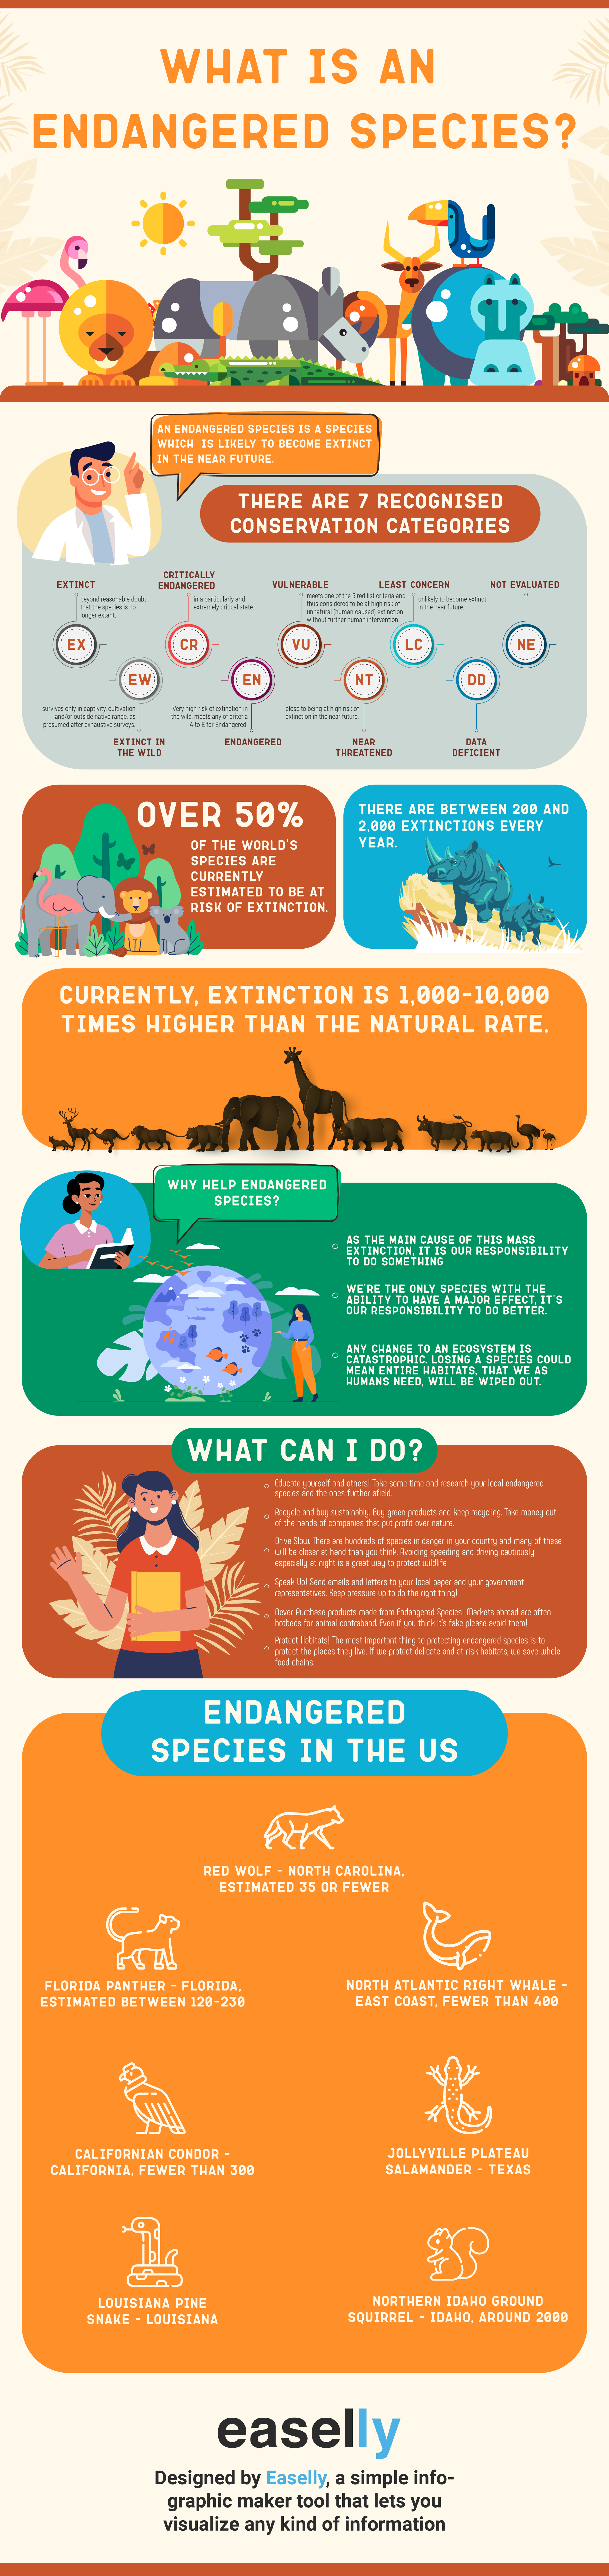 How To Make An Infographic On Animals In Extinction